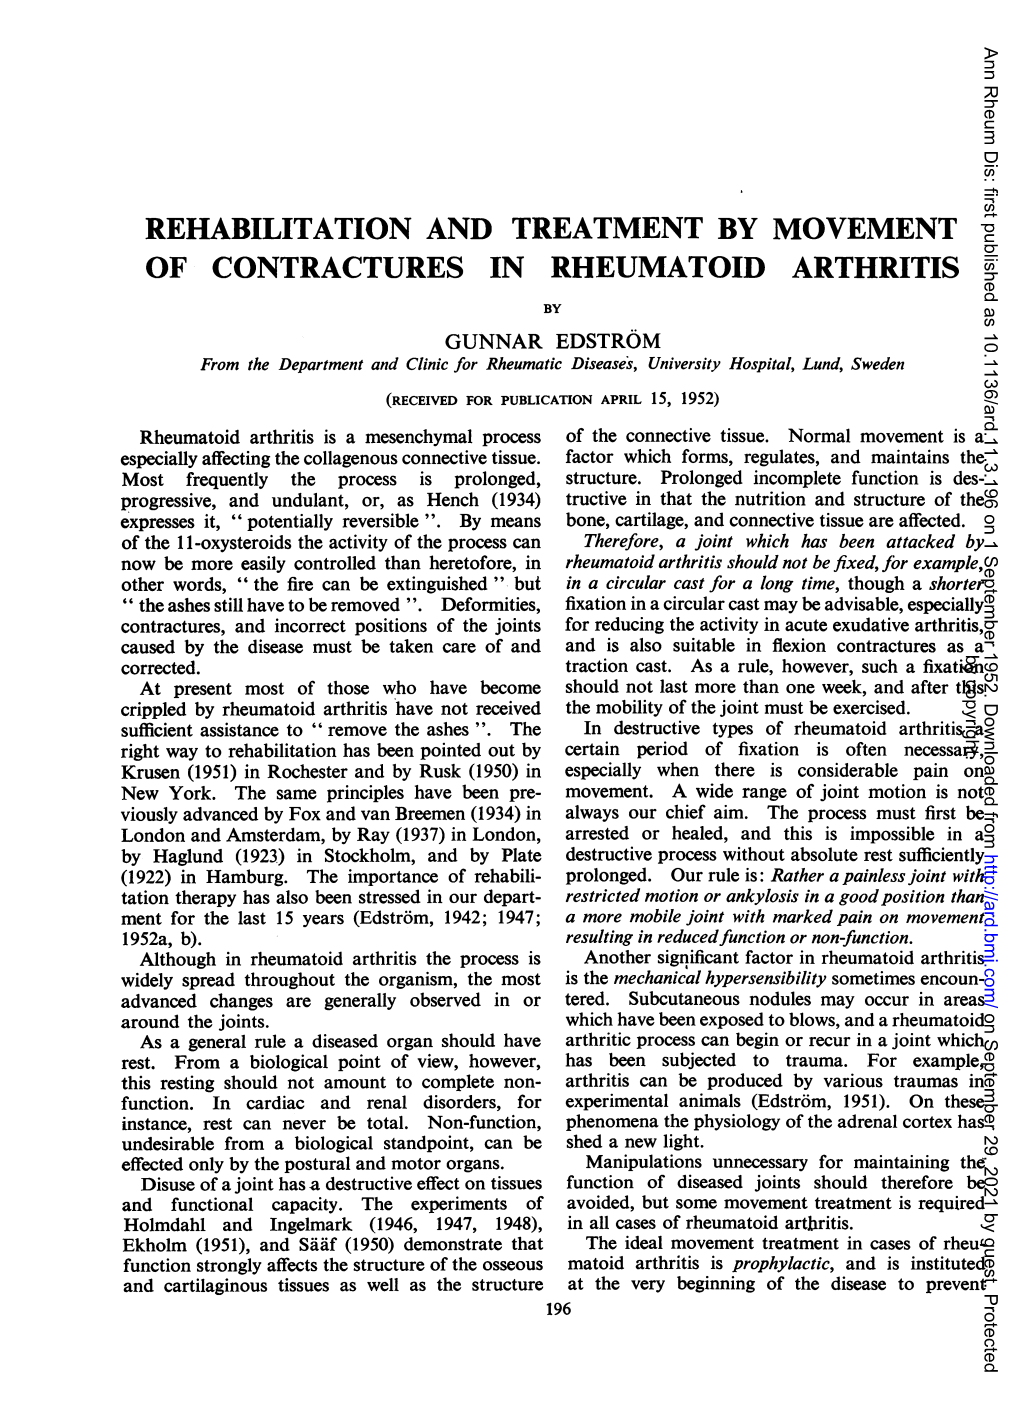 Rehabilitation and Treatment by Movement of Contractures in Rheumatoid Arthritis